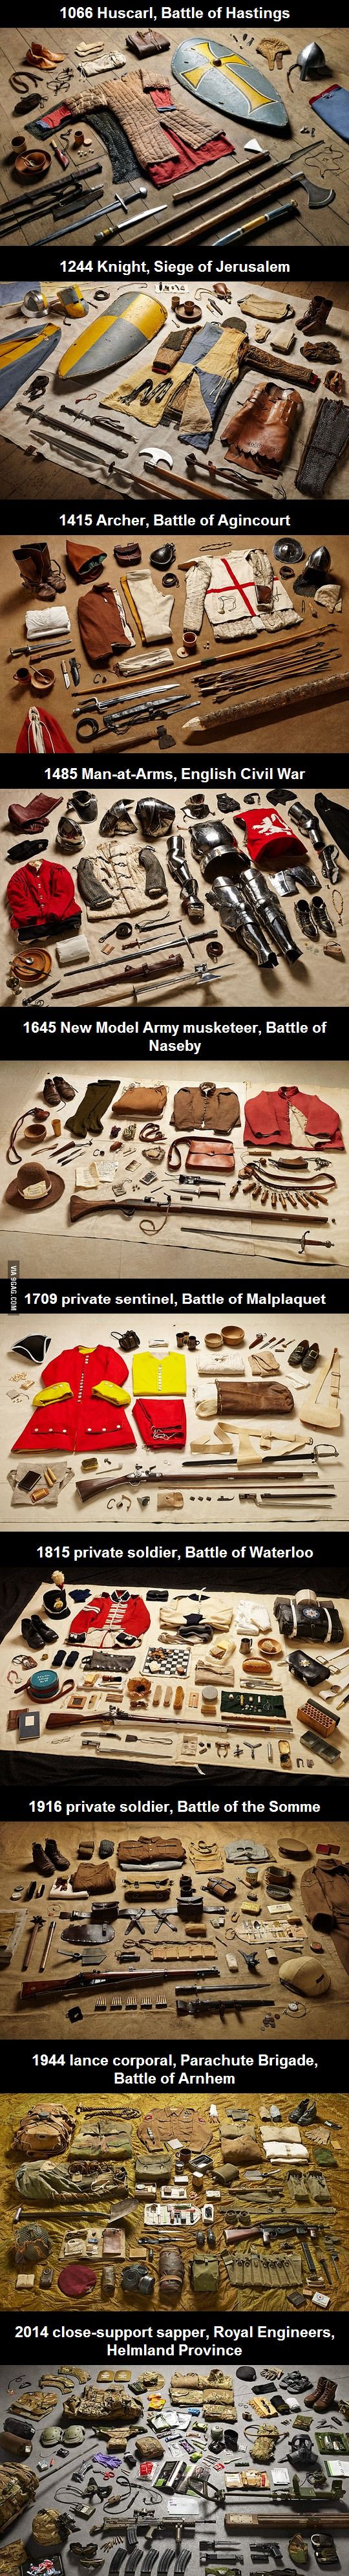 Military kit through the ages: from the Battle of Hastings to Helmand